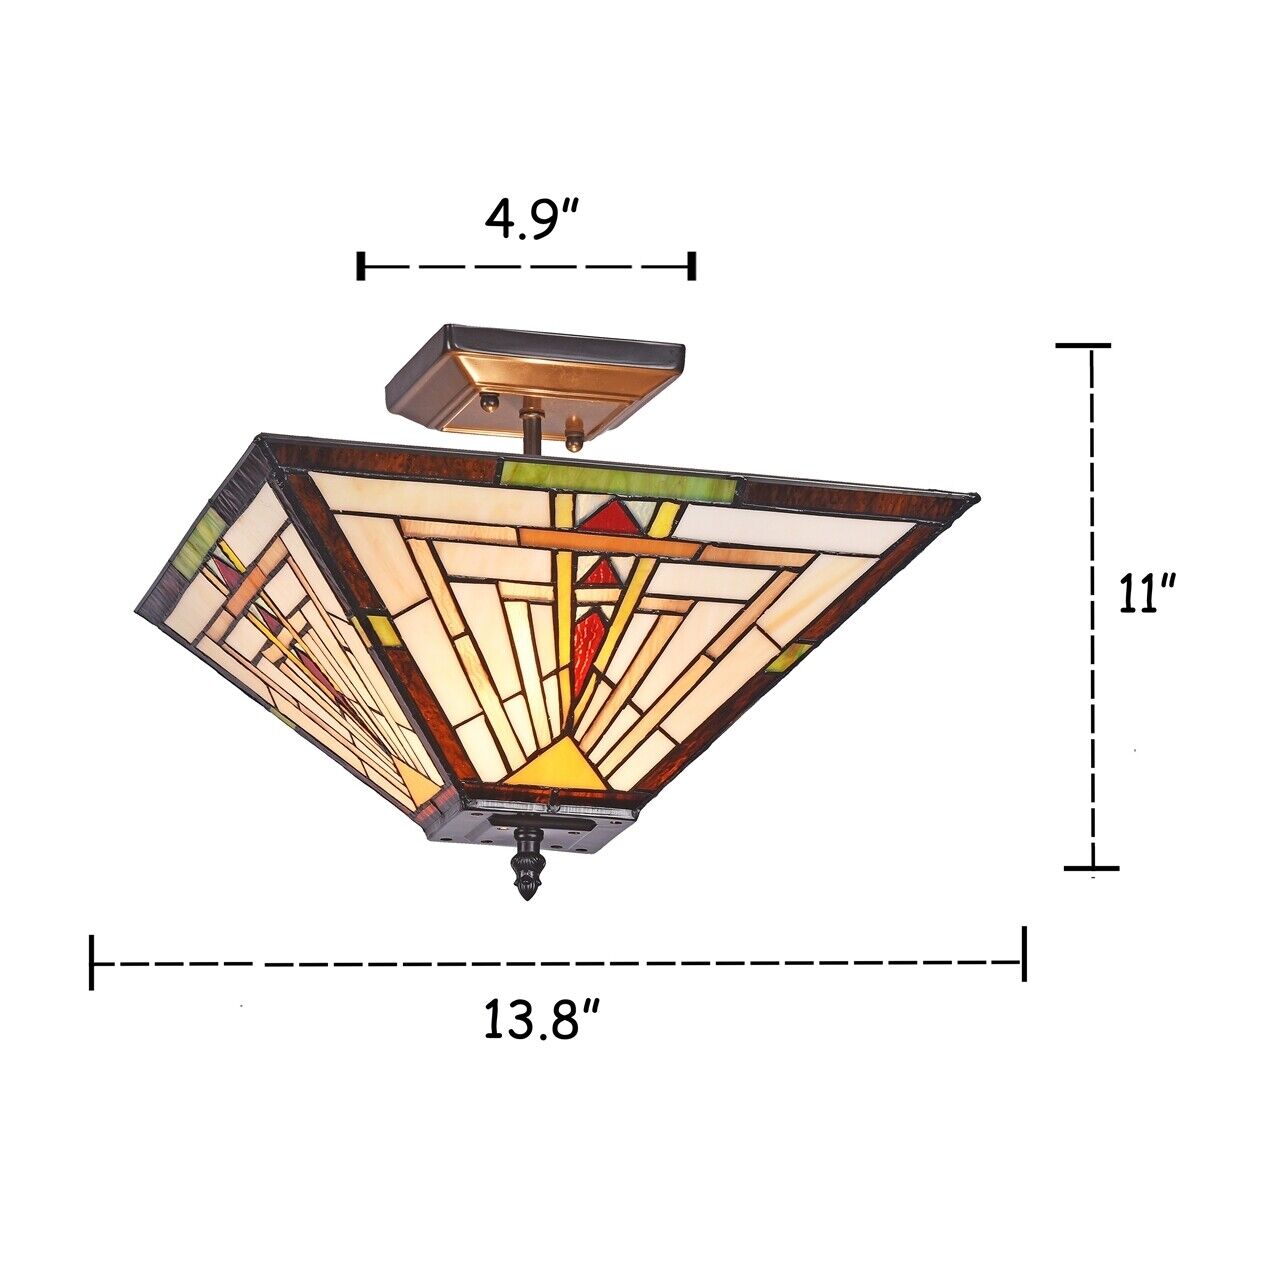 13.8" Antique Vintage Style Mission Stained Glass Semi Flush Ceiling Uplight